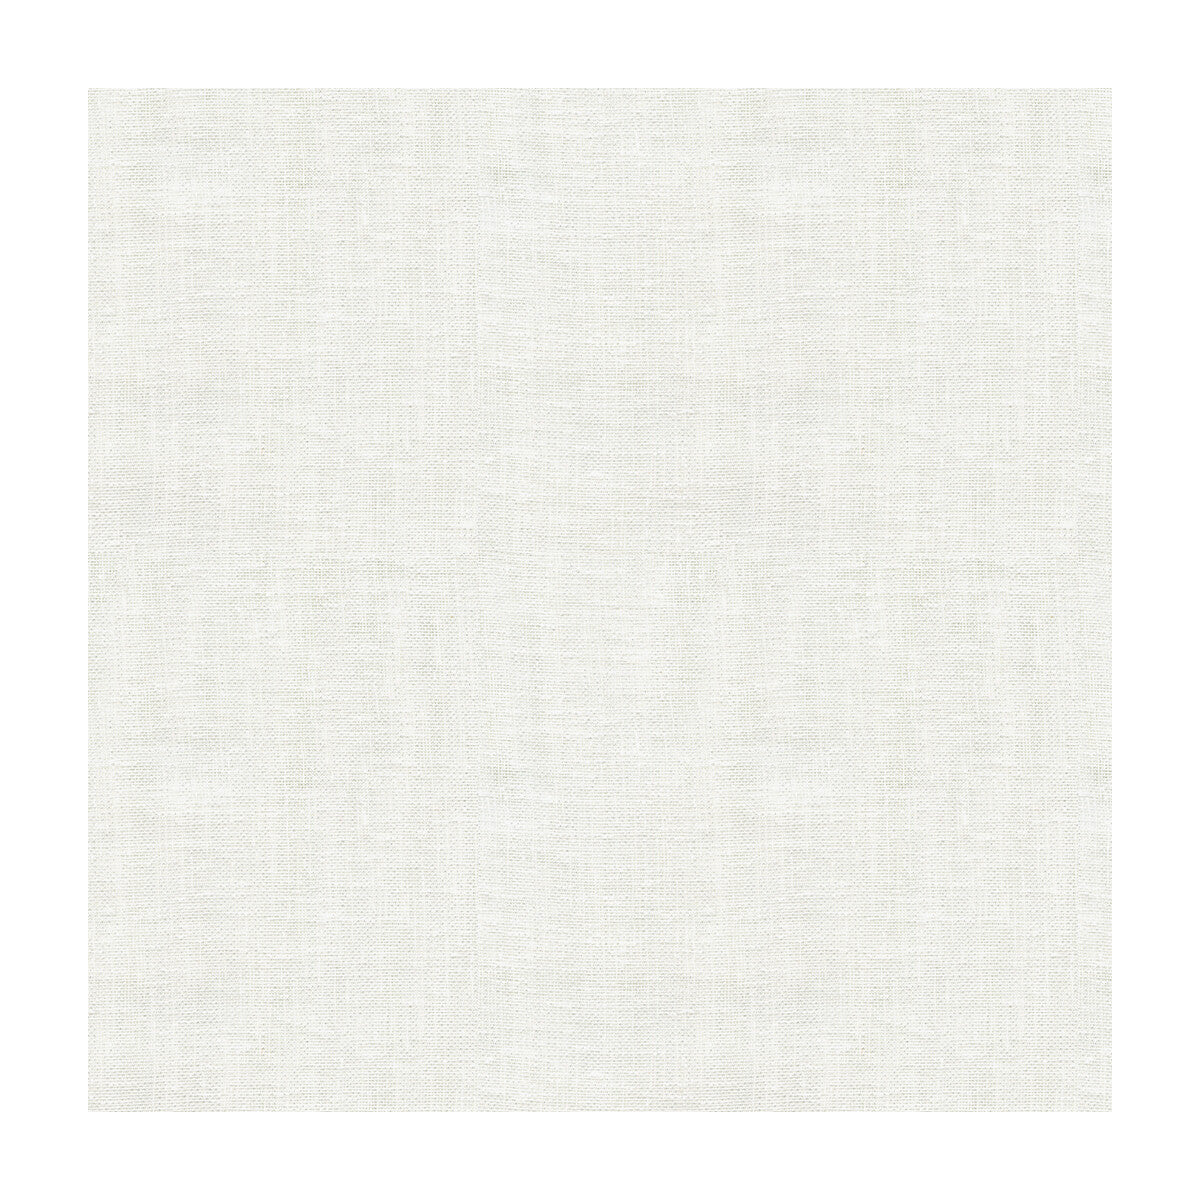 Kravet Contract fabric in 4166-101 color - pattern 4166.101.0 - by Kravet Contract